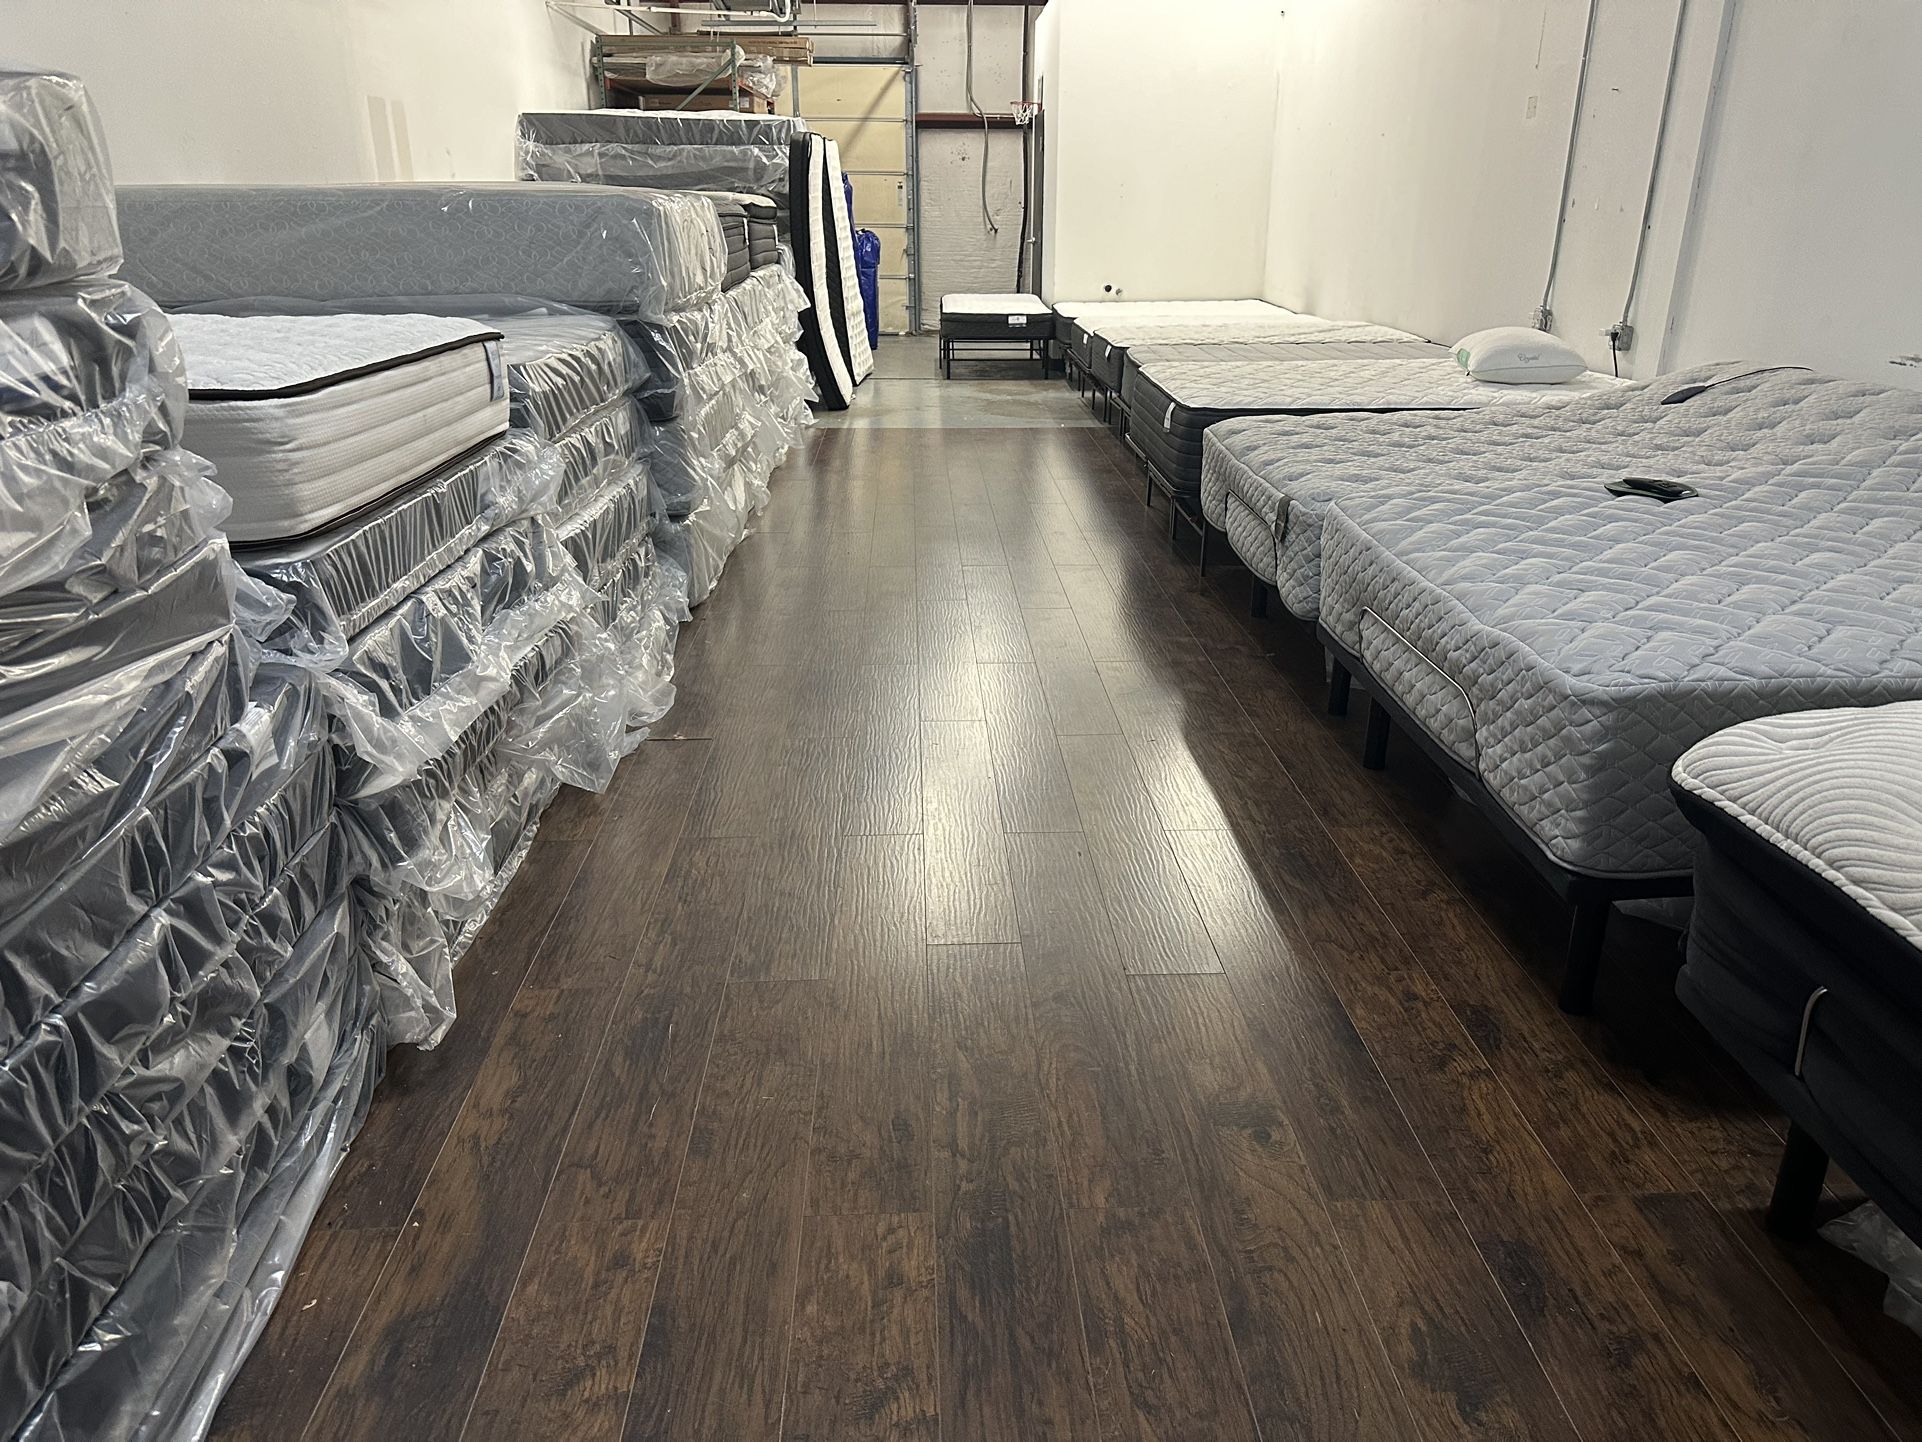 Queen Mattress Blow Out Event Happening Today!